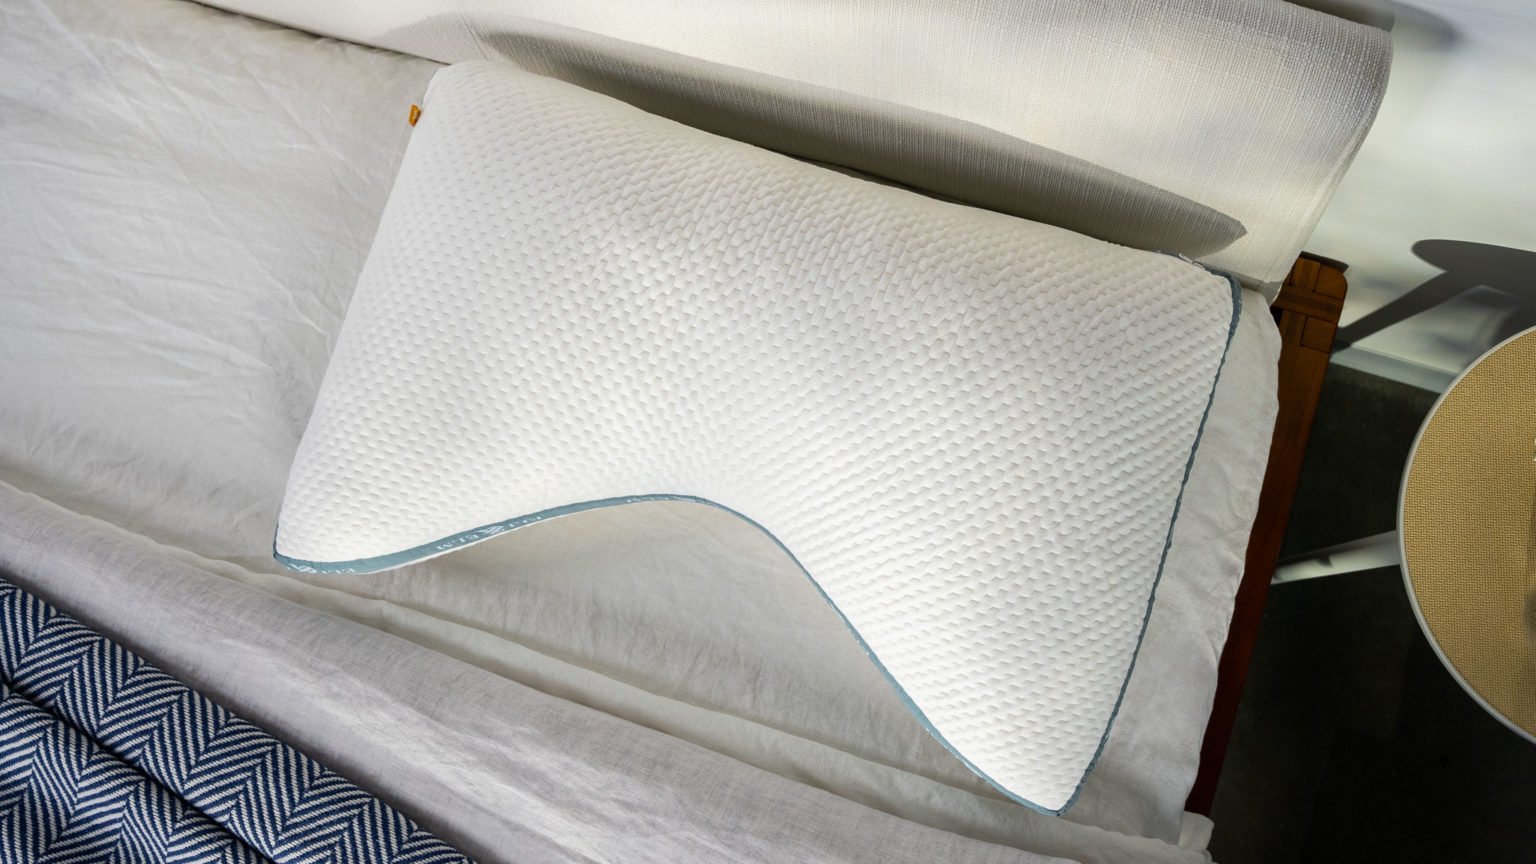 Hybrid Pillow For Side Sleepers - Neck Pain Support Cervical